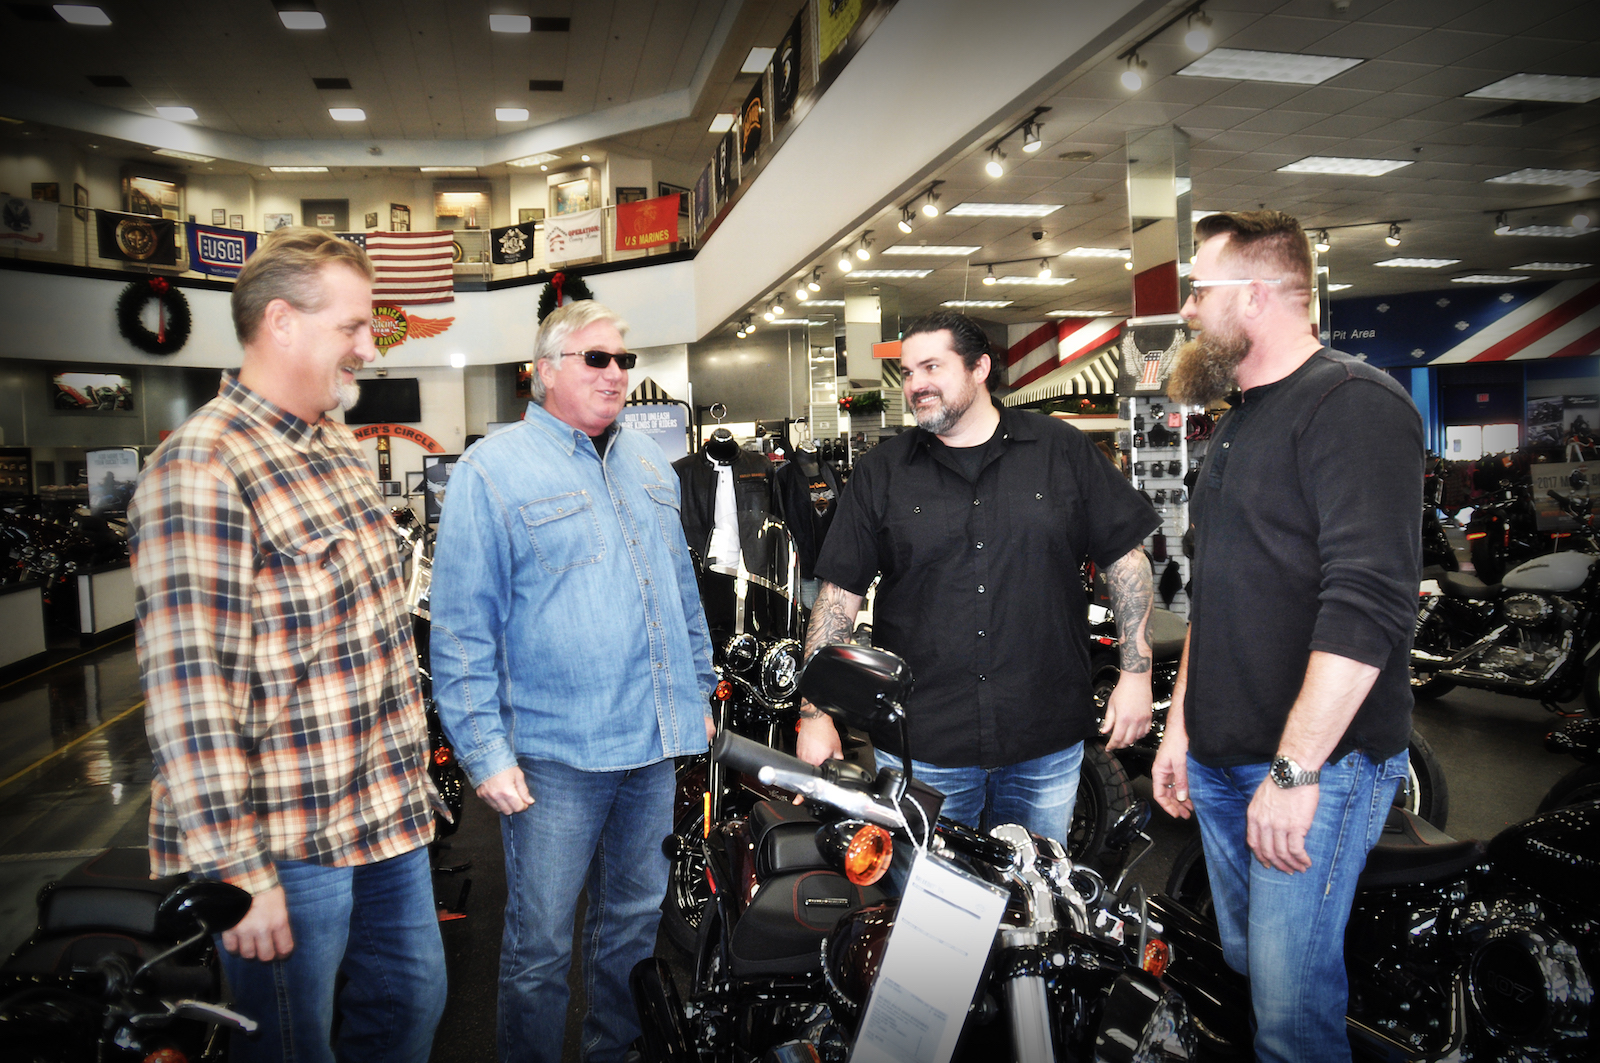 Ray Price Harley-Davidson's new owner is John Morotti, shown here second from left with his general management team.